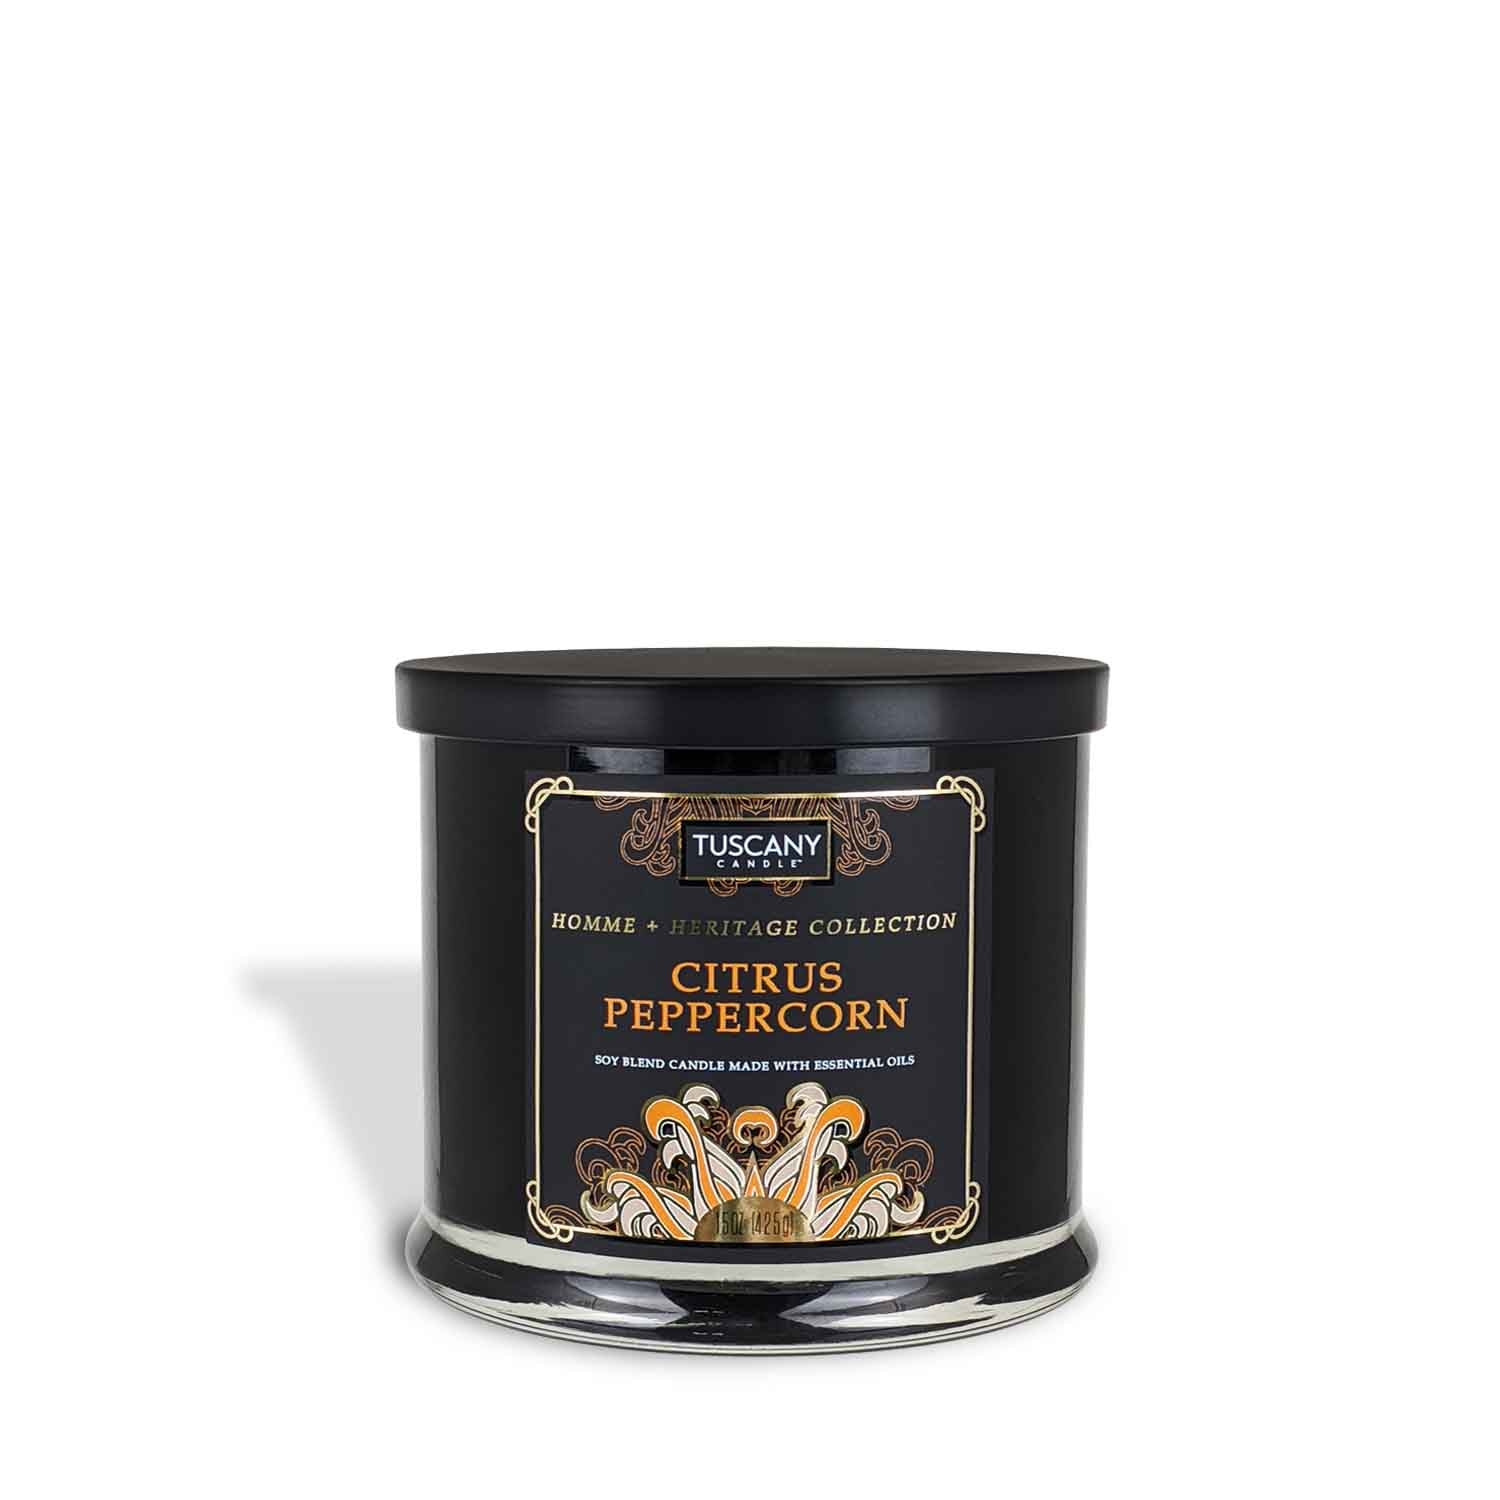 A Citrus Peppercorn Scented Jar Candle (15 oz) – Homme + Heritage Collection by Tuscany Candle, in a black tin, featuring the masculine fragrance of Citrus Peppercorn.